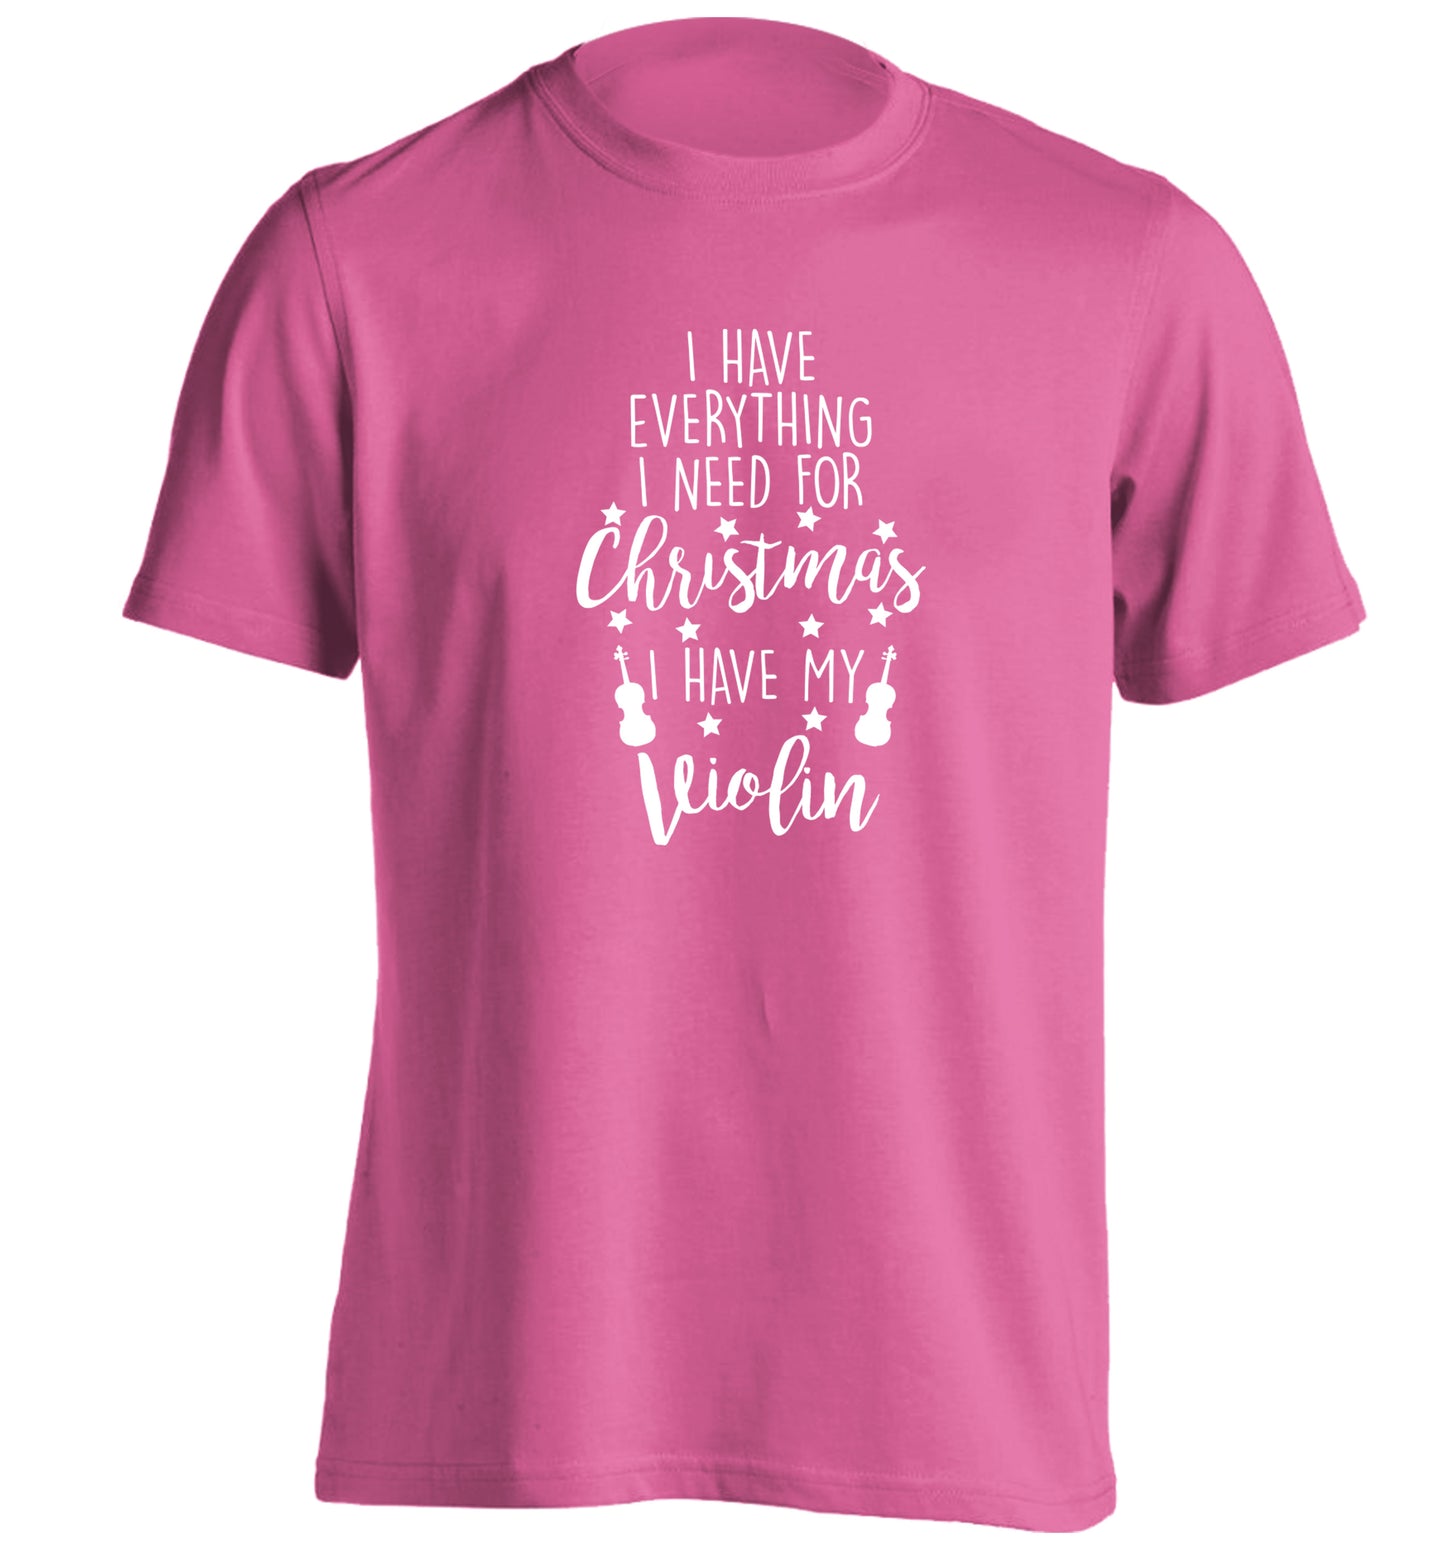 I have everything I need for Christmas I have my violin adults unisex pink Tshirt 2XL